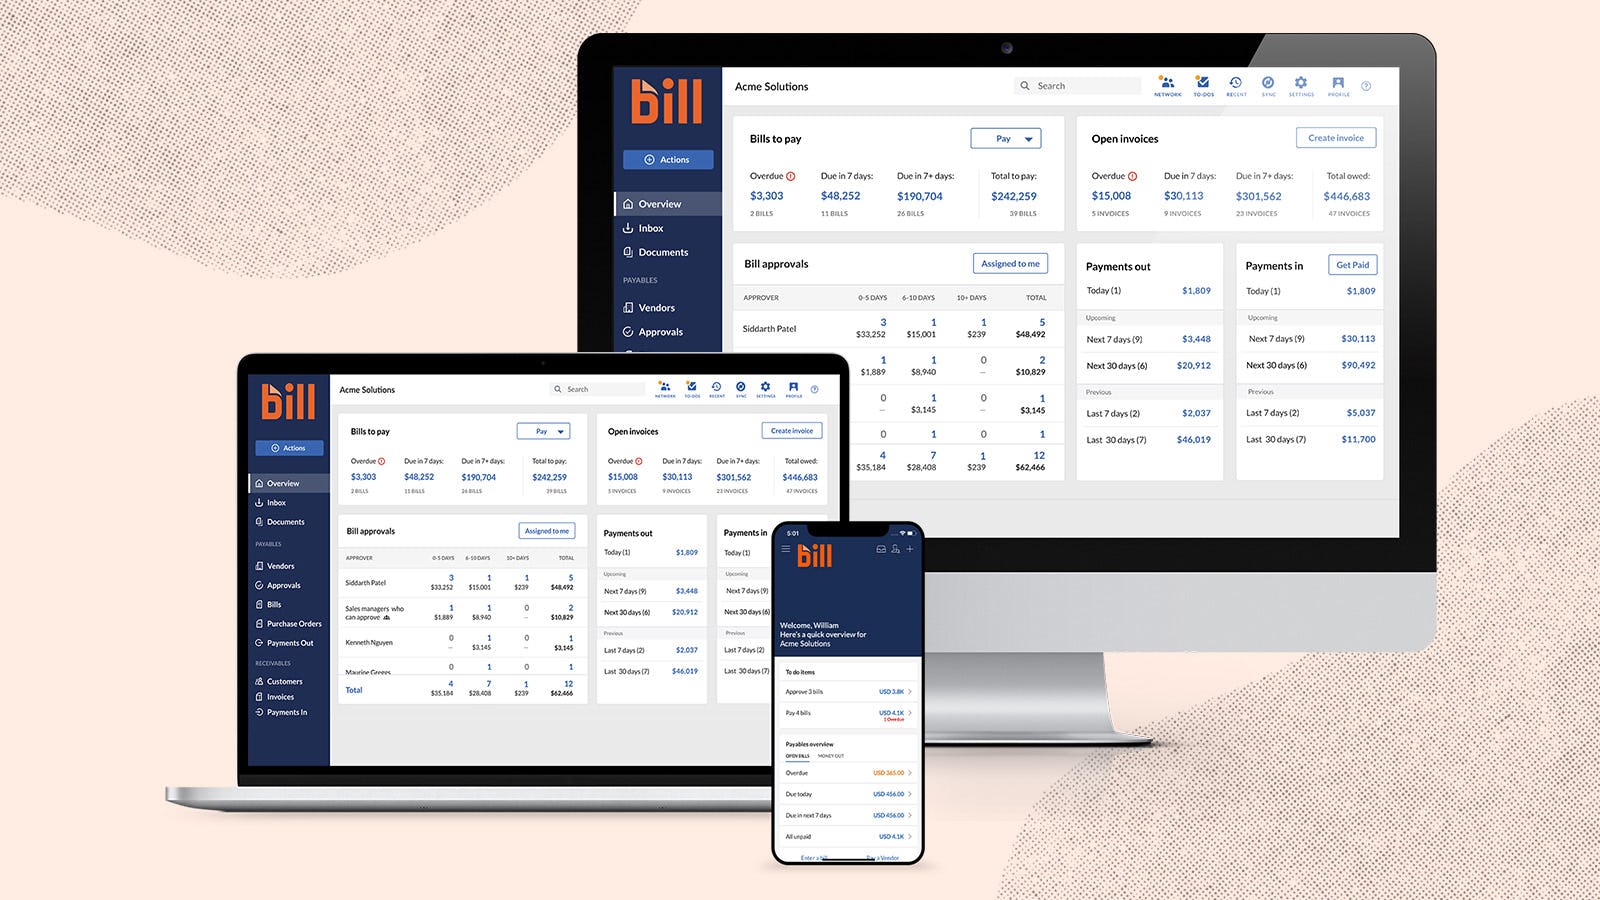 Bill.com Software - BILL provides both desktop and mobile applications so your team can review invoices and send payments on-the-go.